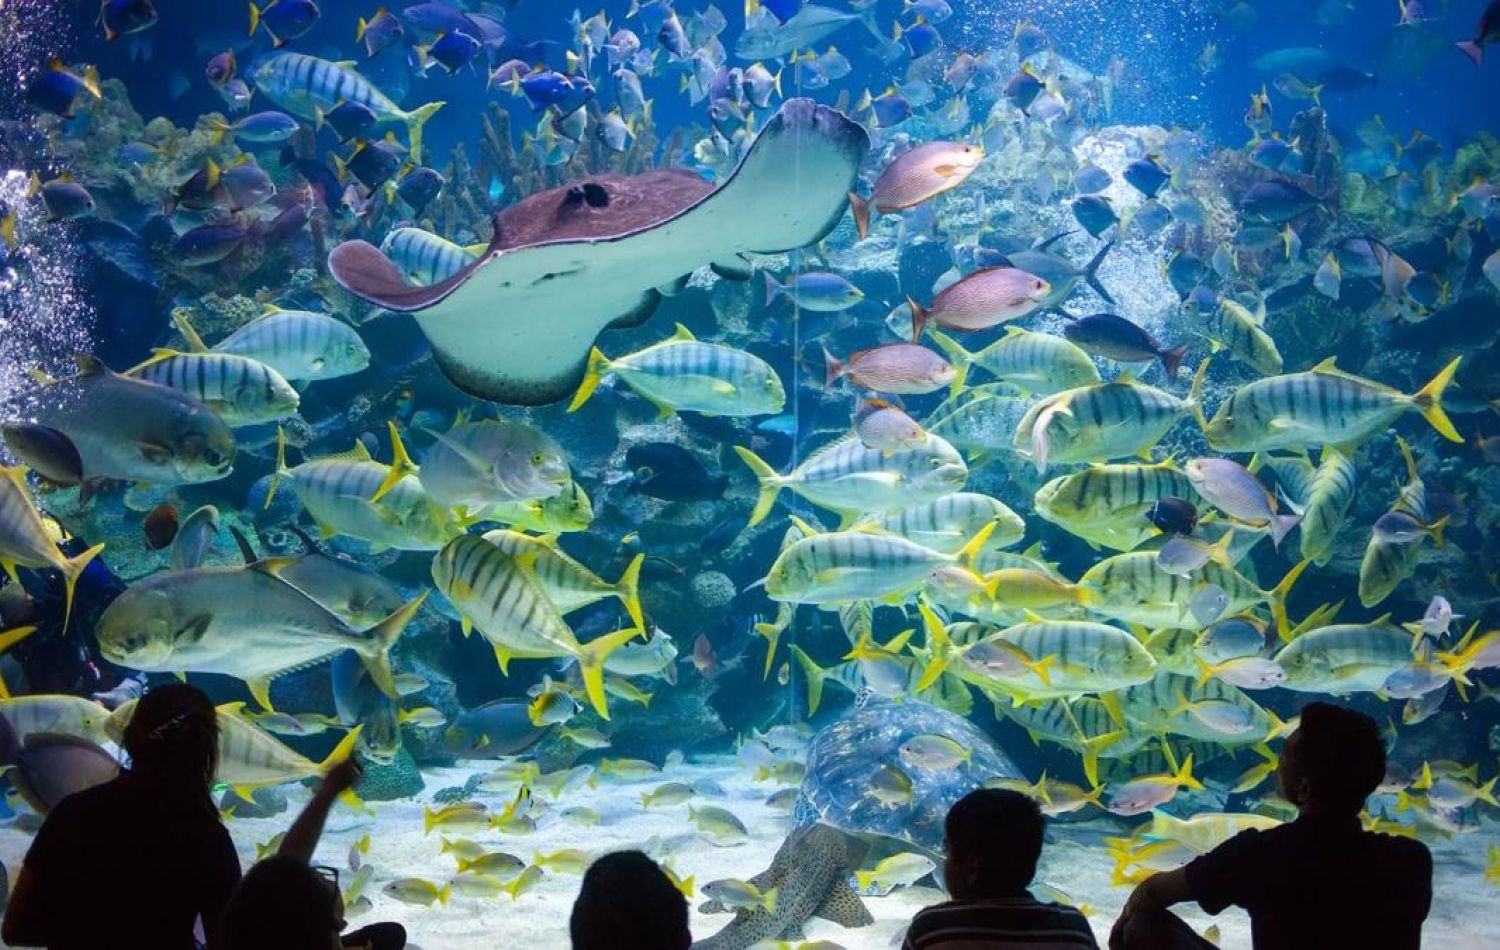 a manta ray with schools of various fish in a fish tank with people pointing and watching them